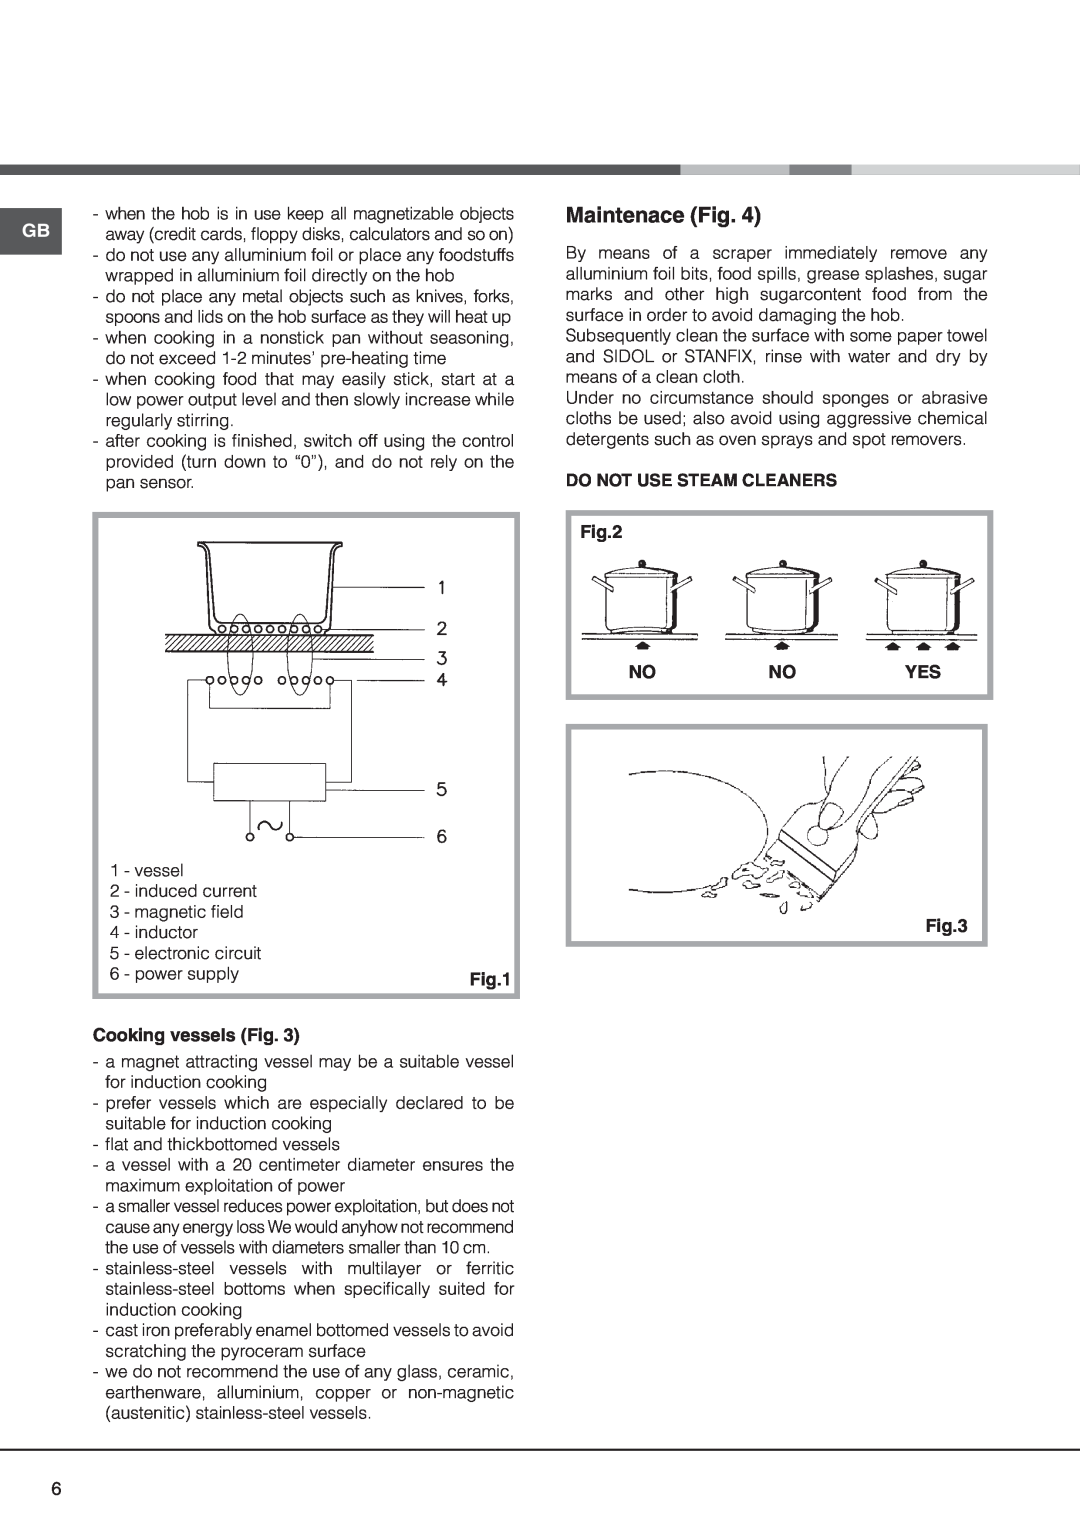 Hotpoint N321IX manual Maintenace Fig, Cooking vessels Fig, Do Not Use Steam Cleaners Nonoyes 